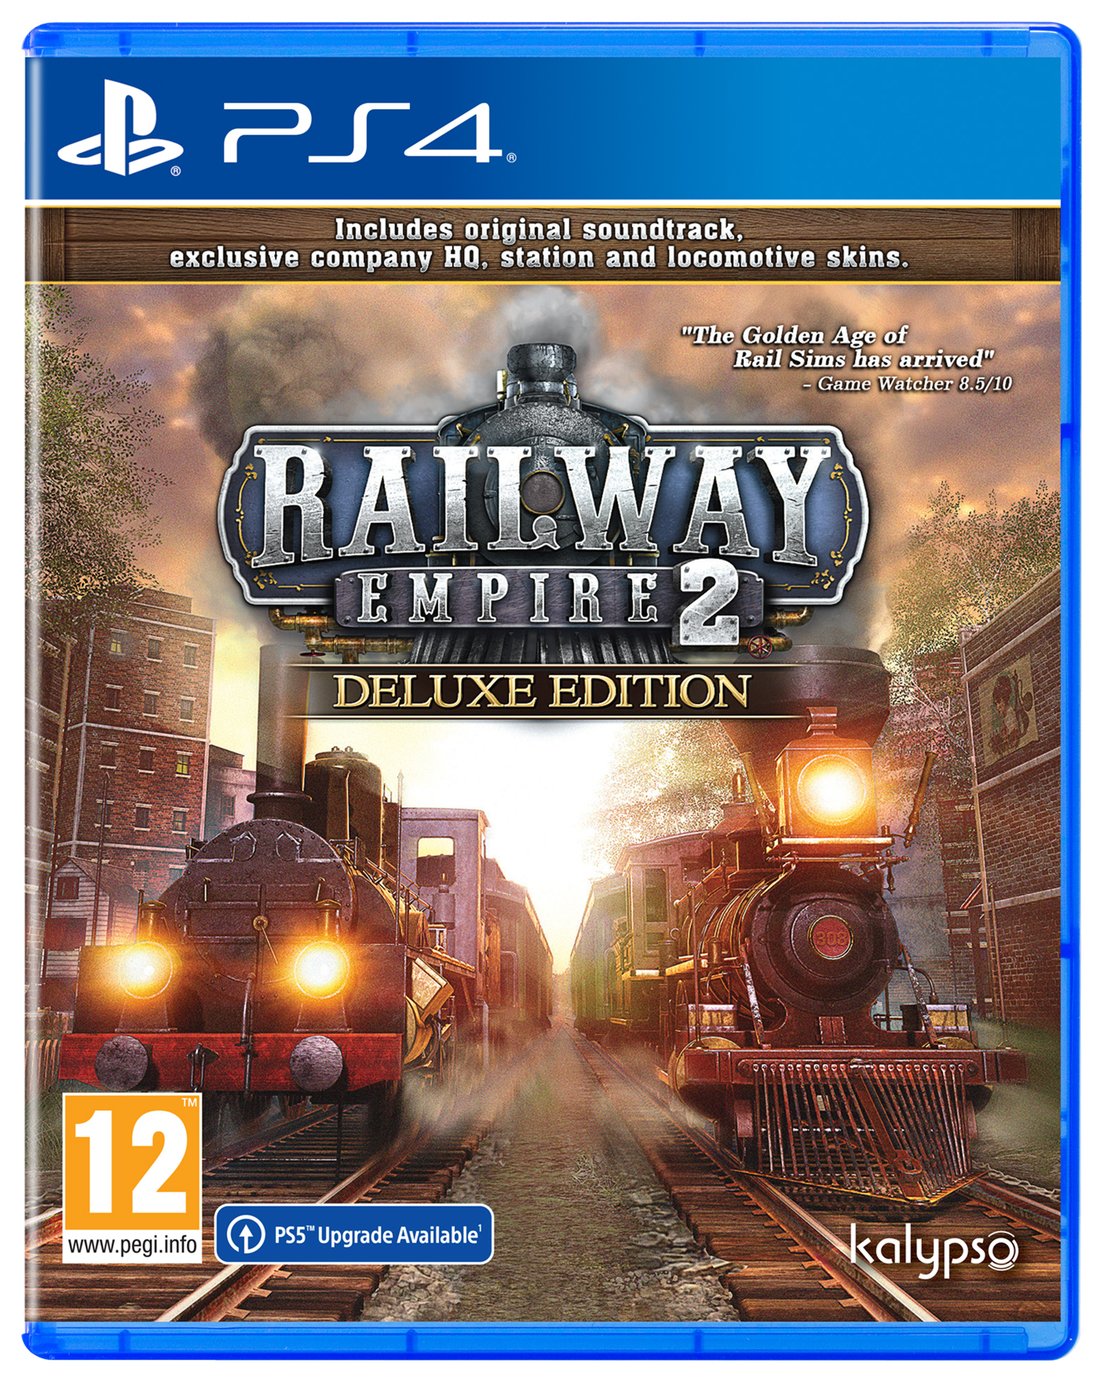 Railway Empire 2 - Deluxe Edition PS4 Game Pre-Order